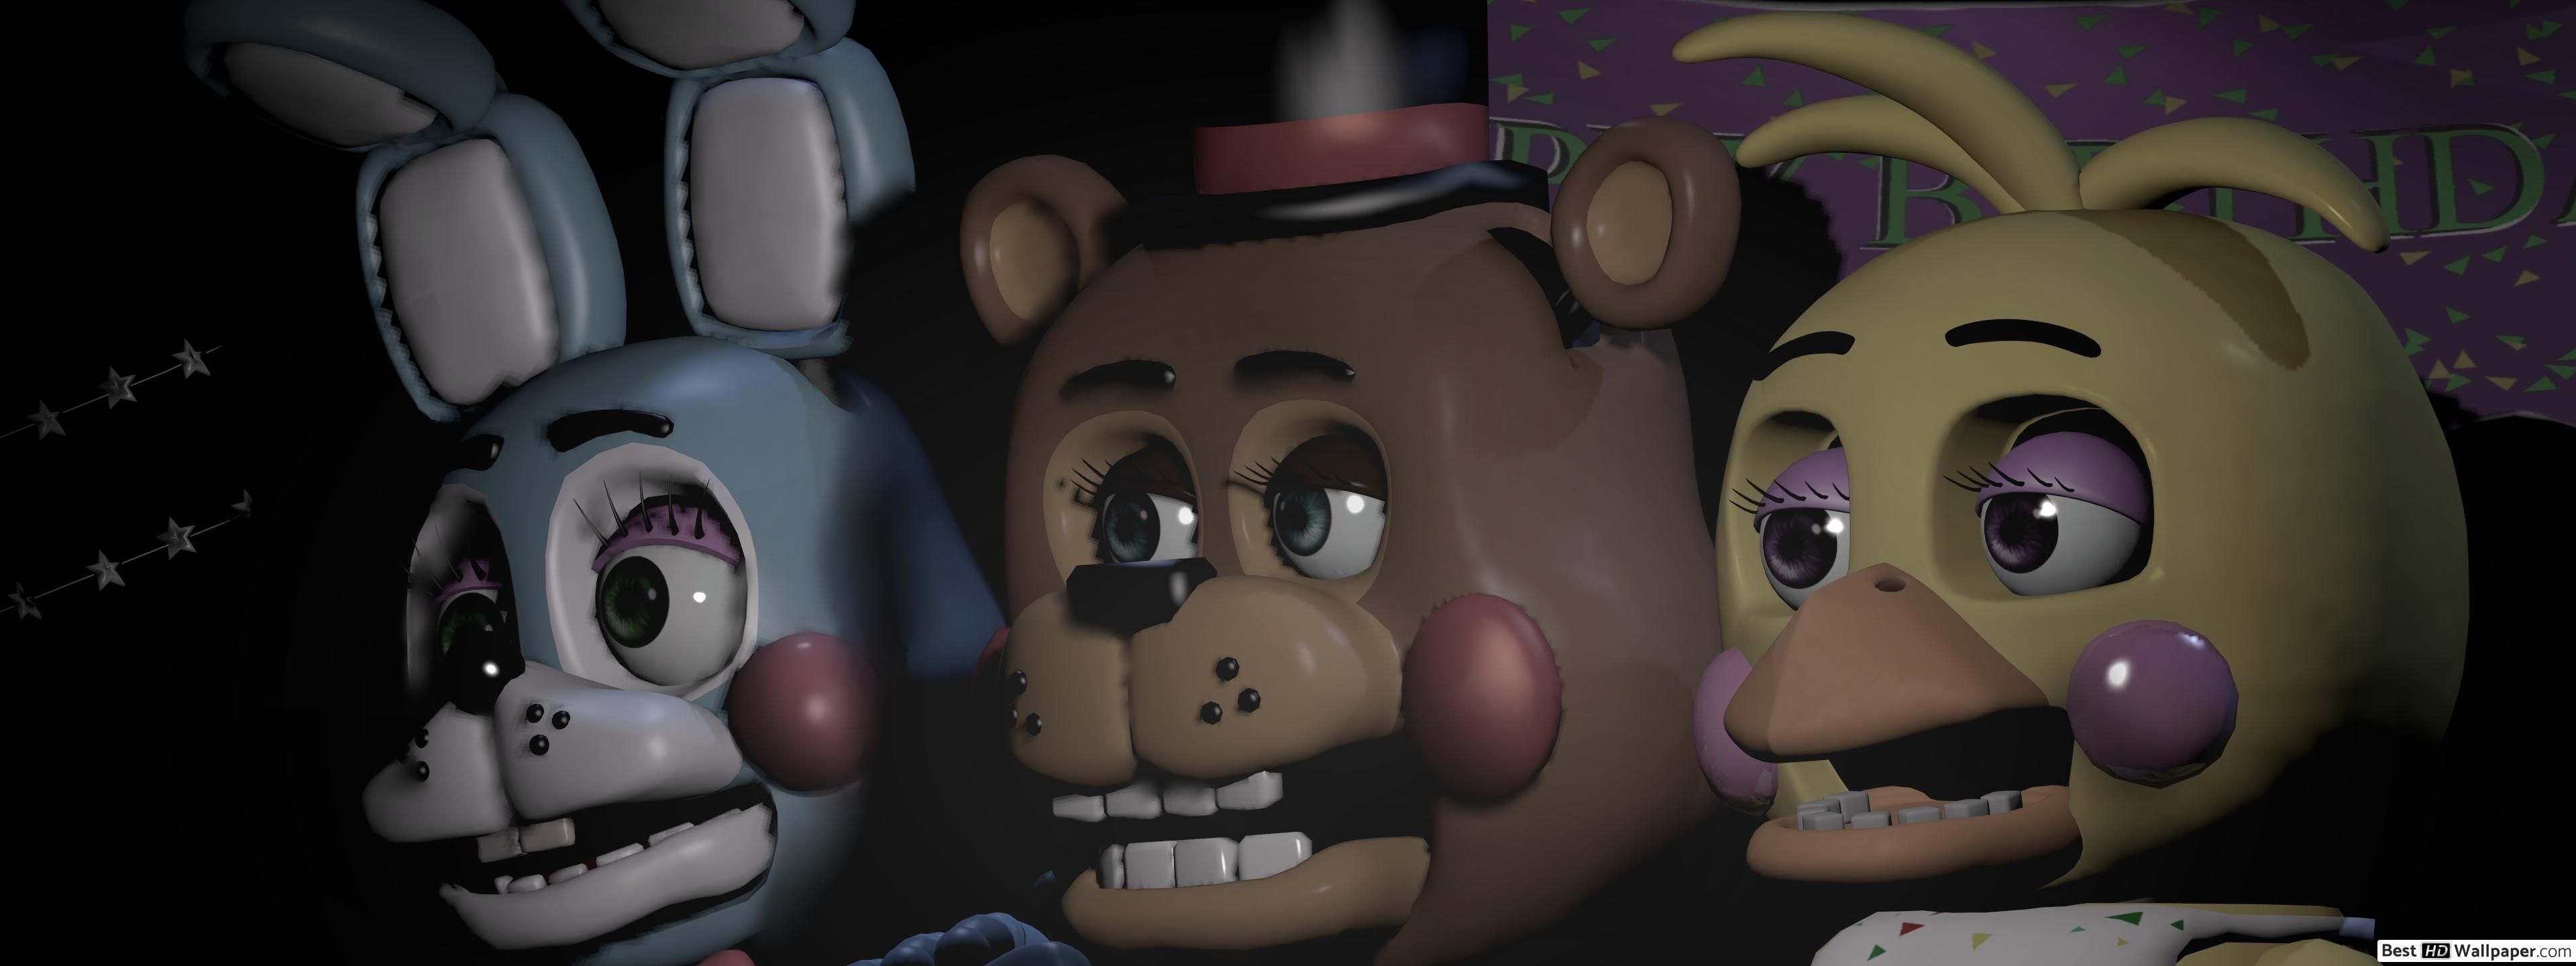 Toy Bonnie, Freddy, Chica of Five Nights at Freddy's Sister